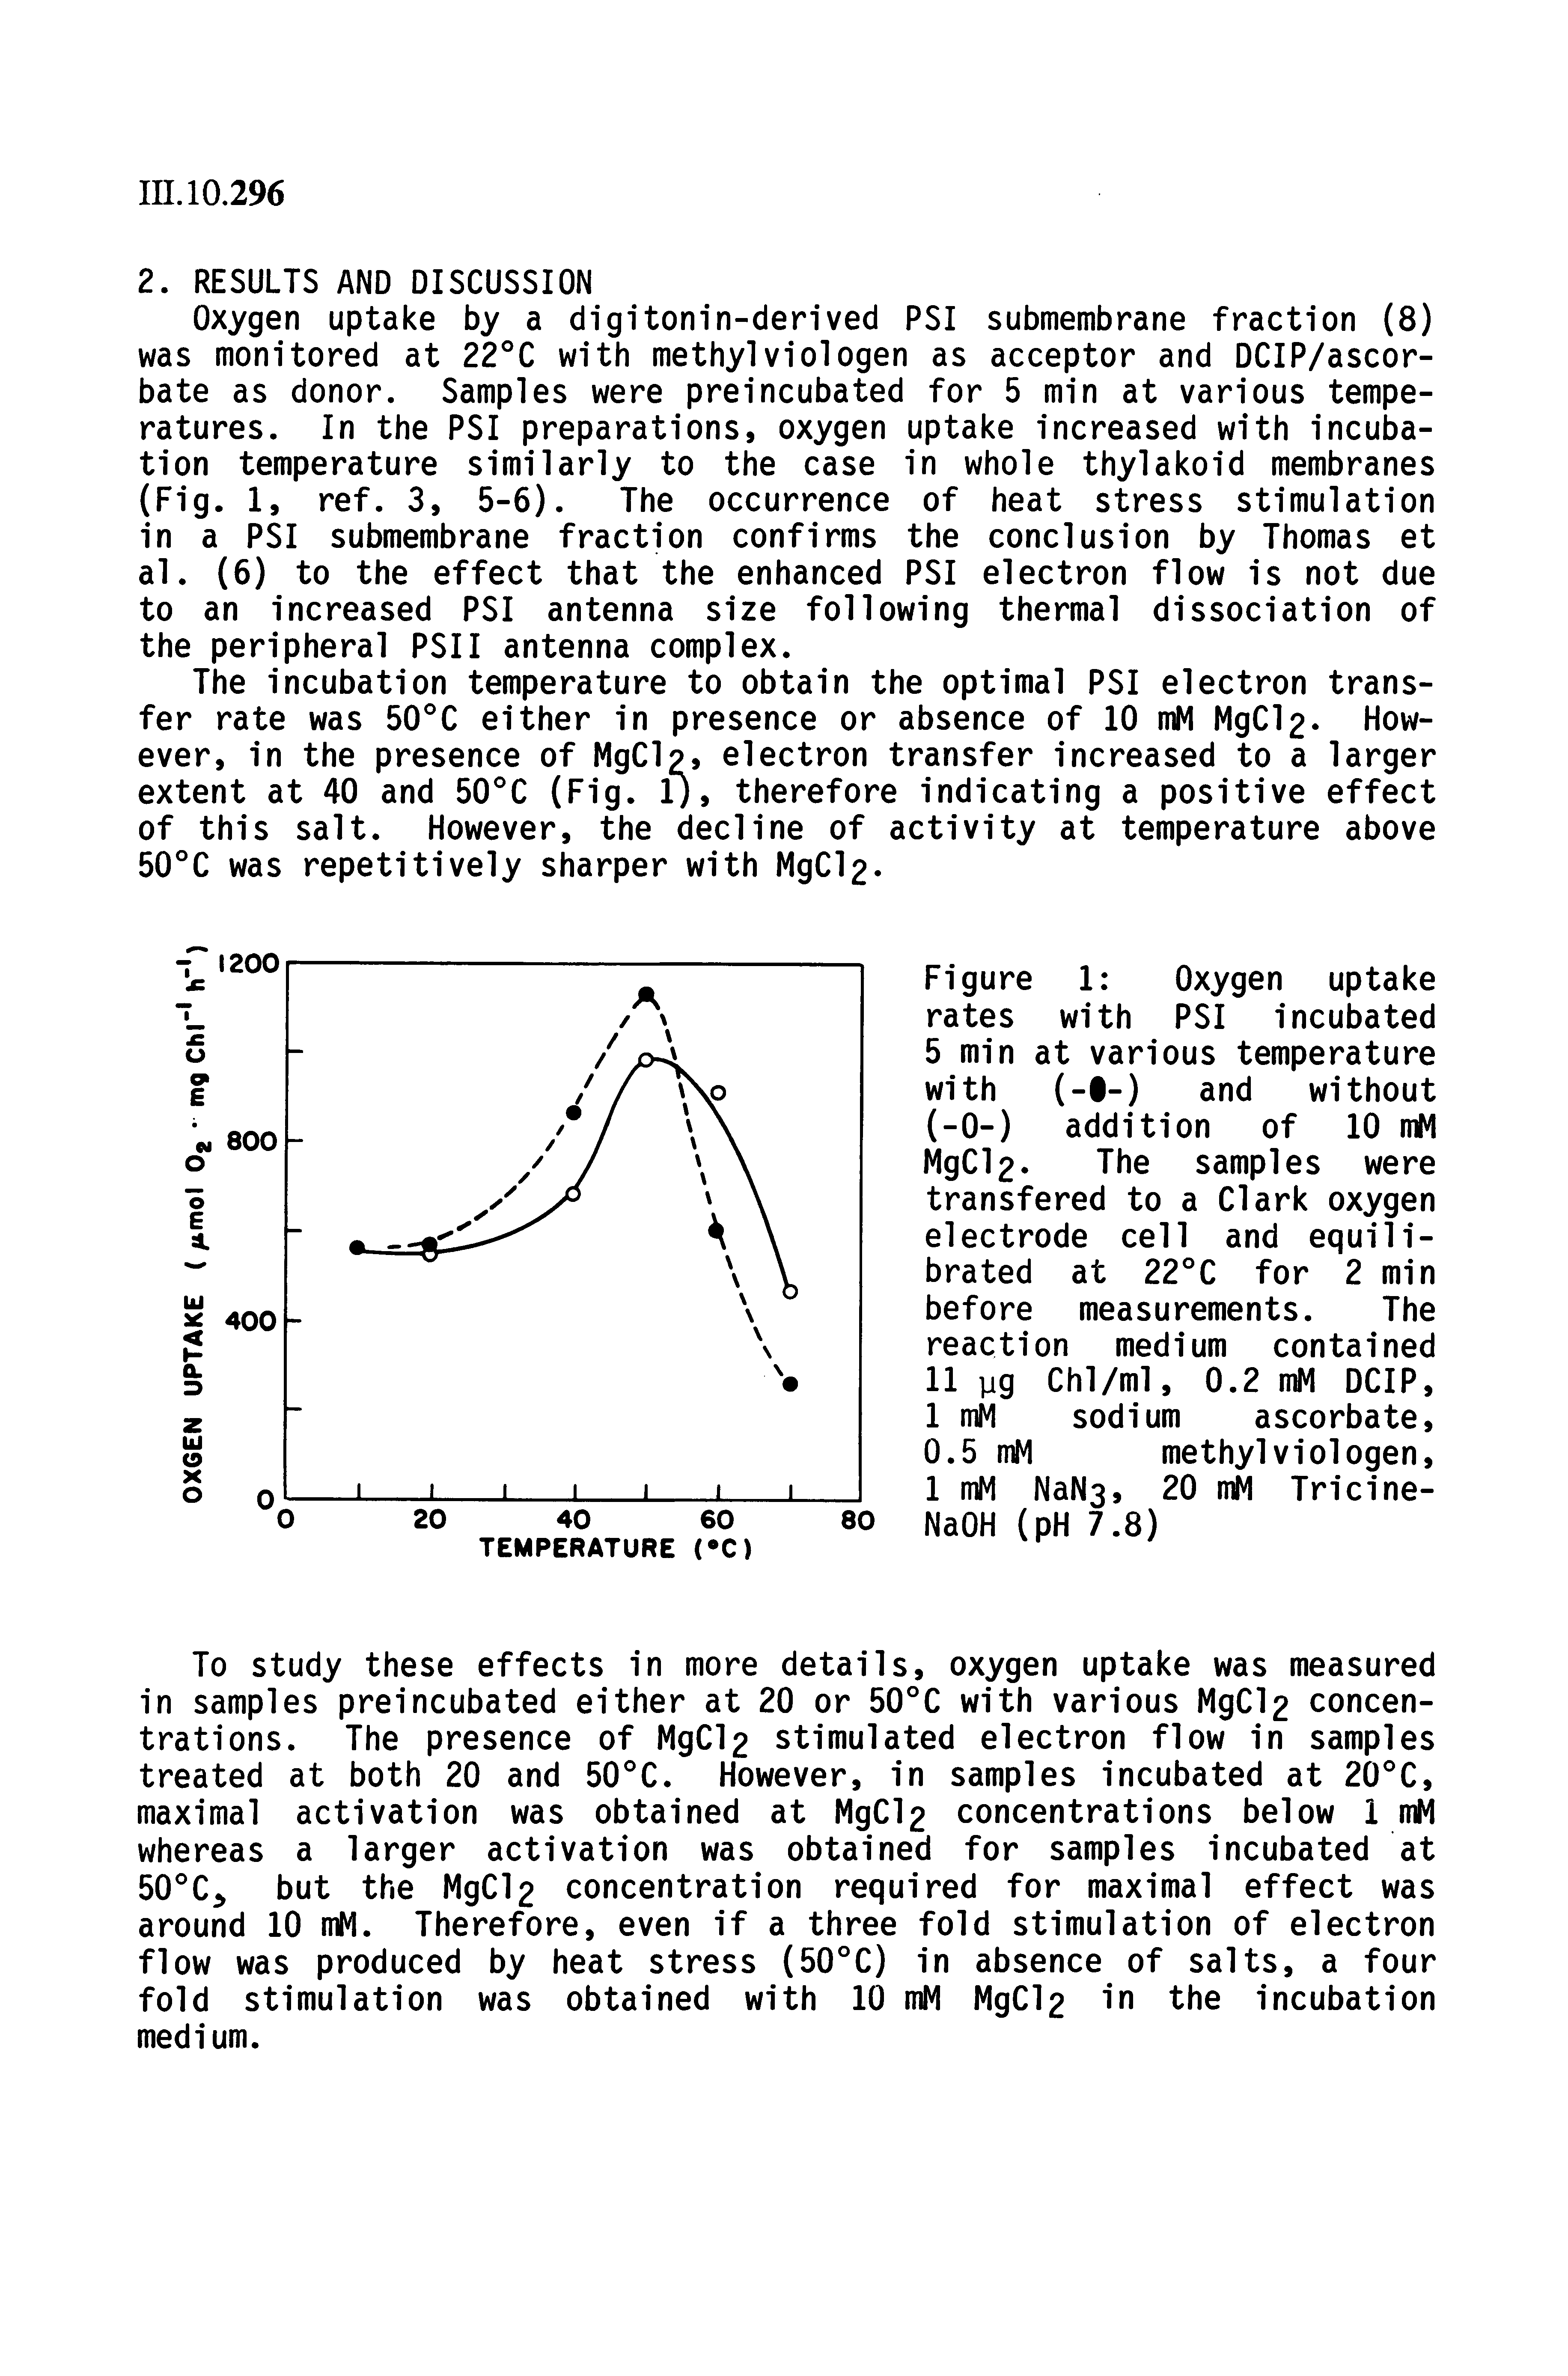 Figure 1 Oxygen uptake rates with PSI incubated 5 min at various temperature with (- -) and without (-0-) addition of 10 mM MgCl2. The samples were transfered to a Clark oxygen electrode cell and equilibrated at 22°C for 2 min before measurements. The reaction medium contained 11 pg Chl/ml, 0.2 mM DCIP, 1 mM sodium ascorbate, 0.5 mM methyl viologen, 1 mM NaN3, 20 mM Tricine-NaOH (pH 7.8)...